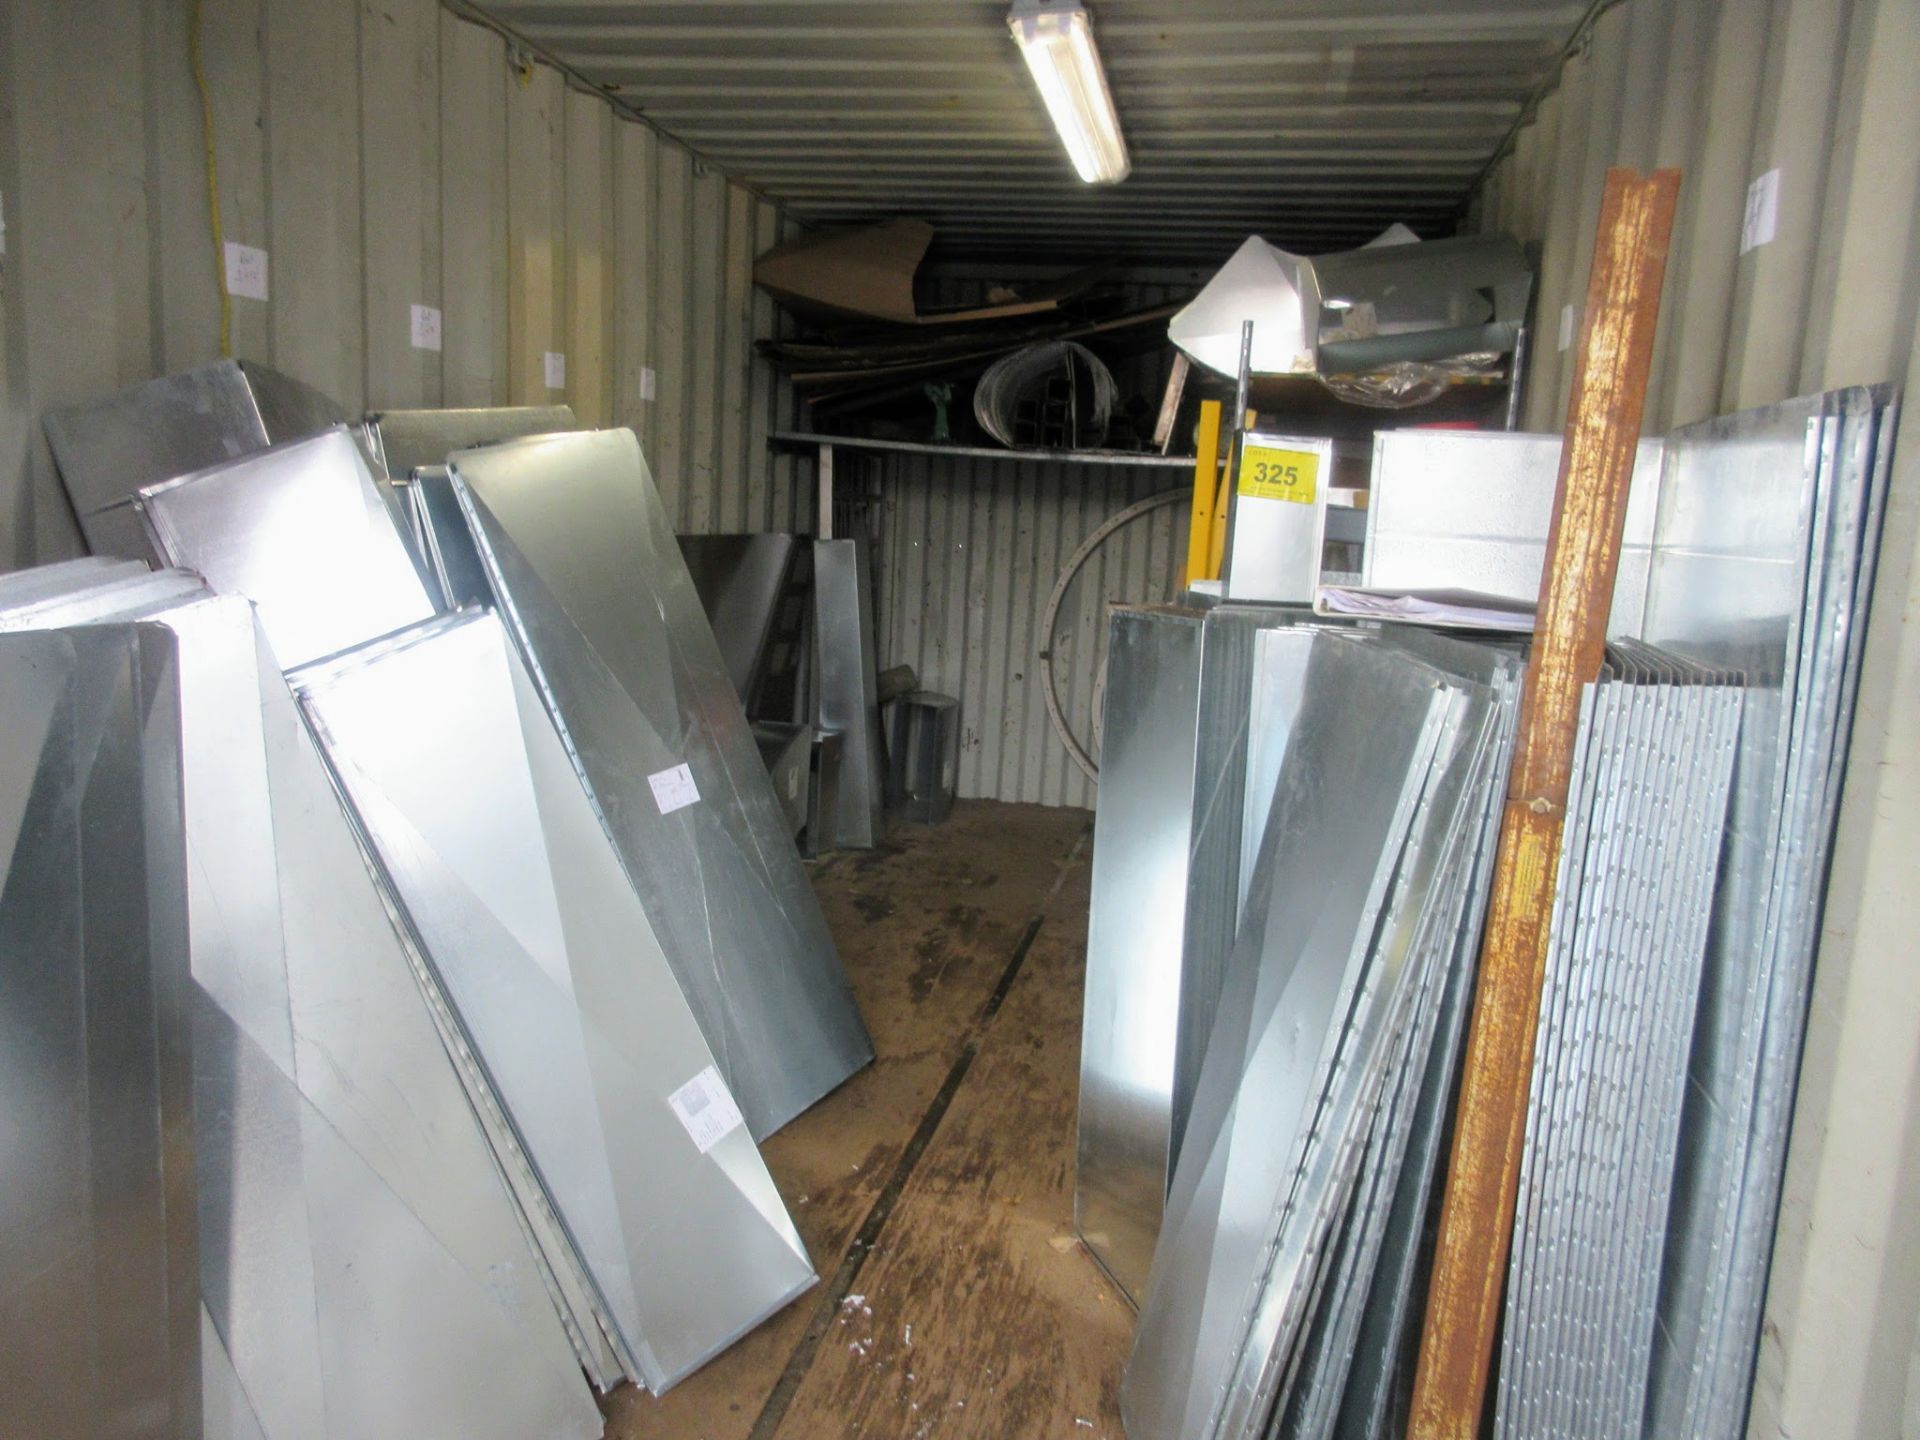 CONTENTS OF 20' SEACAN INCLUDING HVAC / DUCTWORK COMPONENTS, SUPPLIES, (4) U-LINE POSTS, ETC.